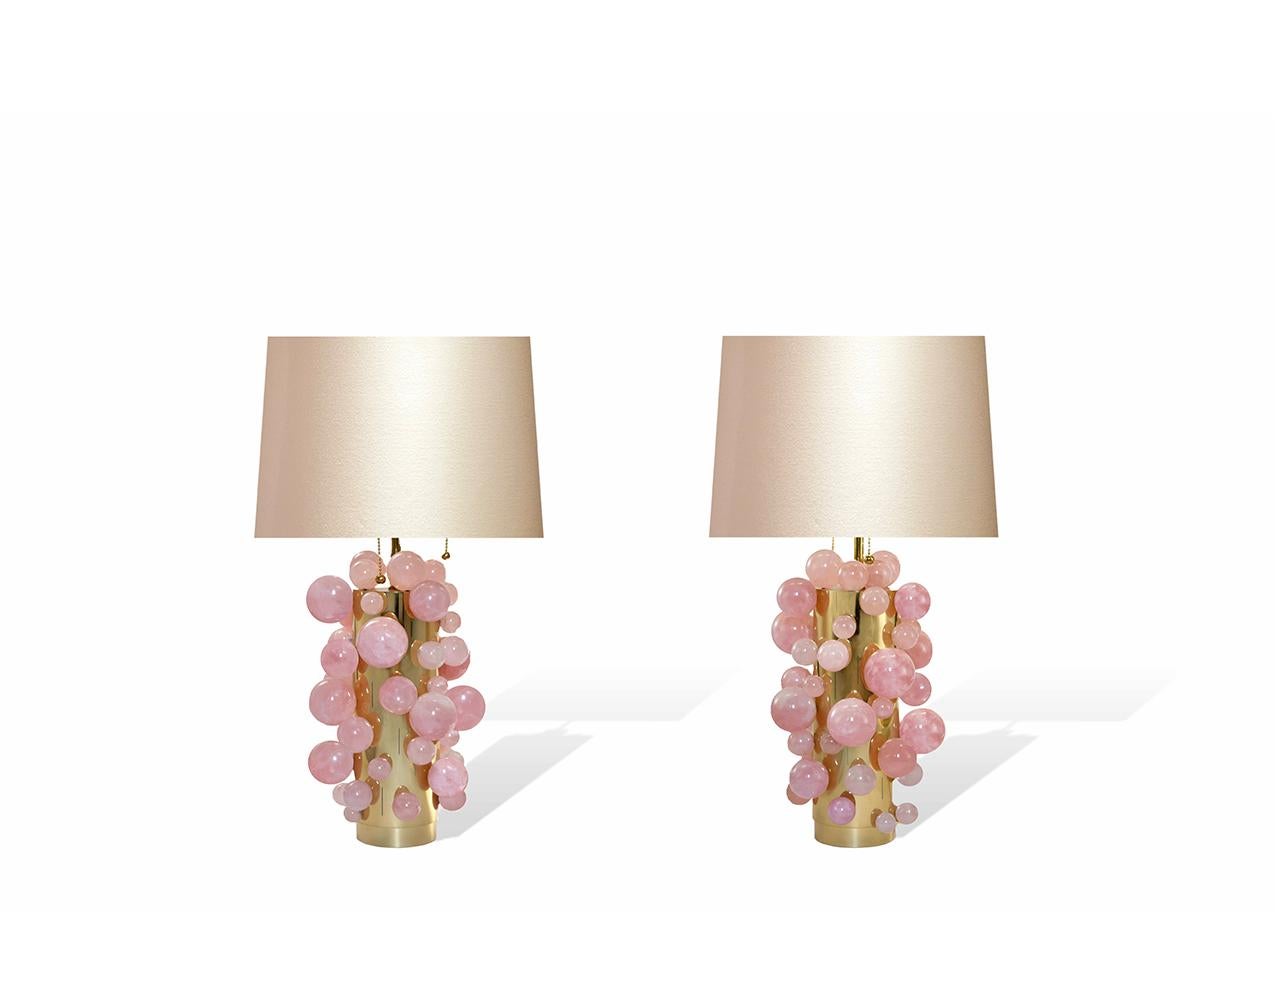 Pair of pink rock crystal bubble lamps with polished brass finishes, created by Phoenix Gallery, NYC. Measures: To the rock crystal part 13 in / H. Overall height 25 inch High, Lampshade is not included.
Recommend shade size: 13”top x 14” bottom x